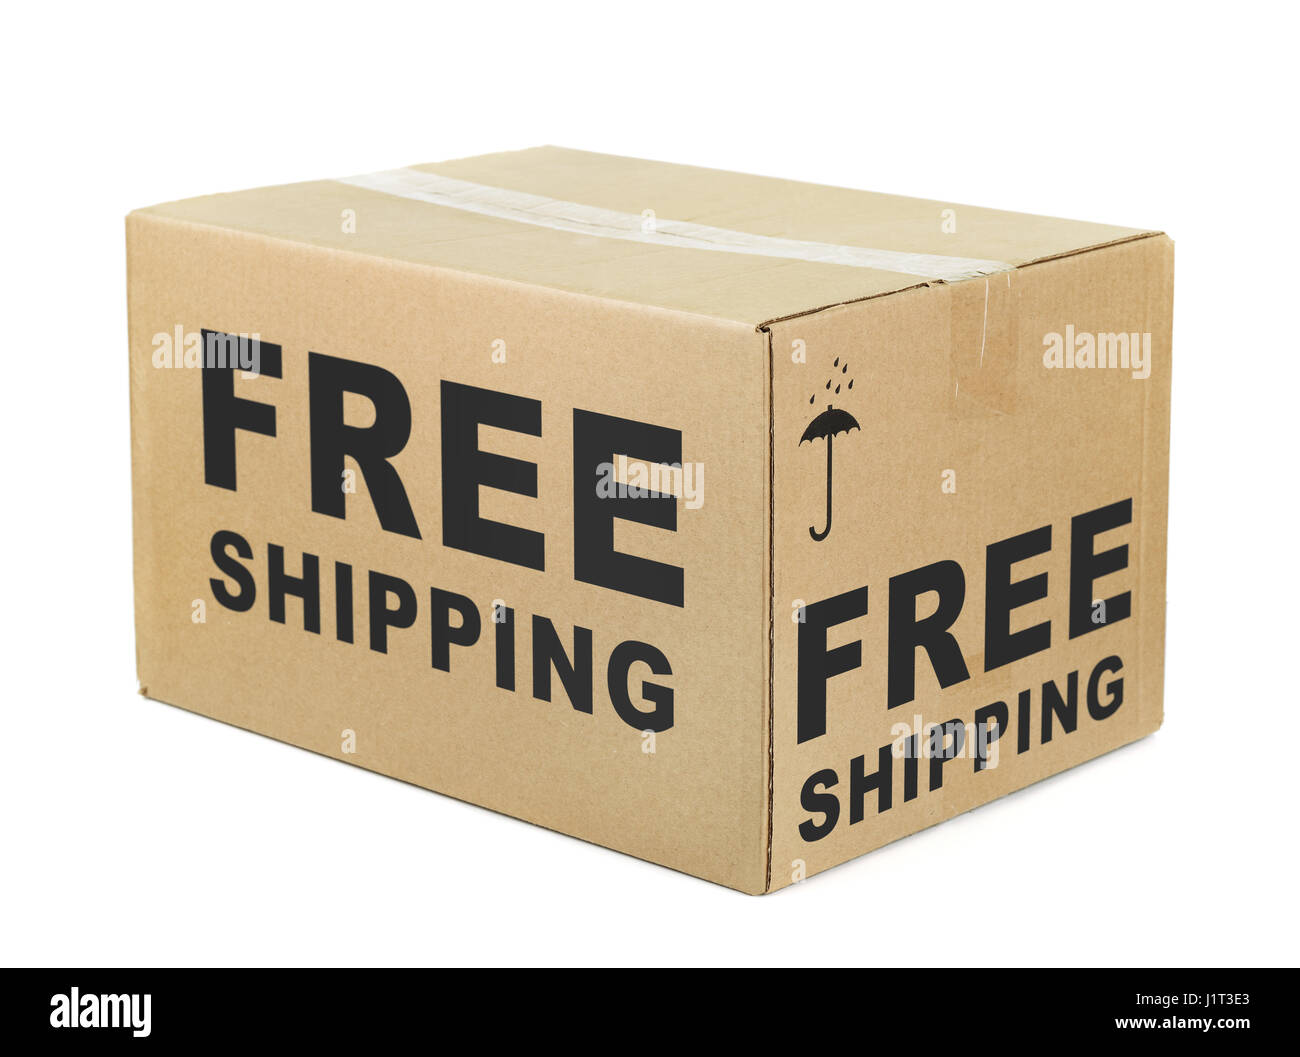 Free shipping cardboard box isolated on white Stock Photo